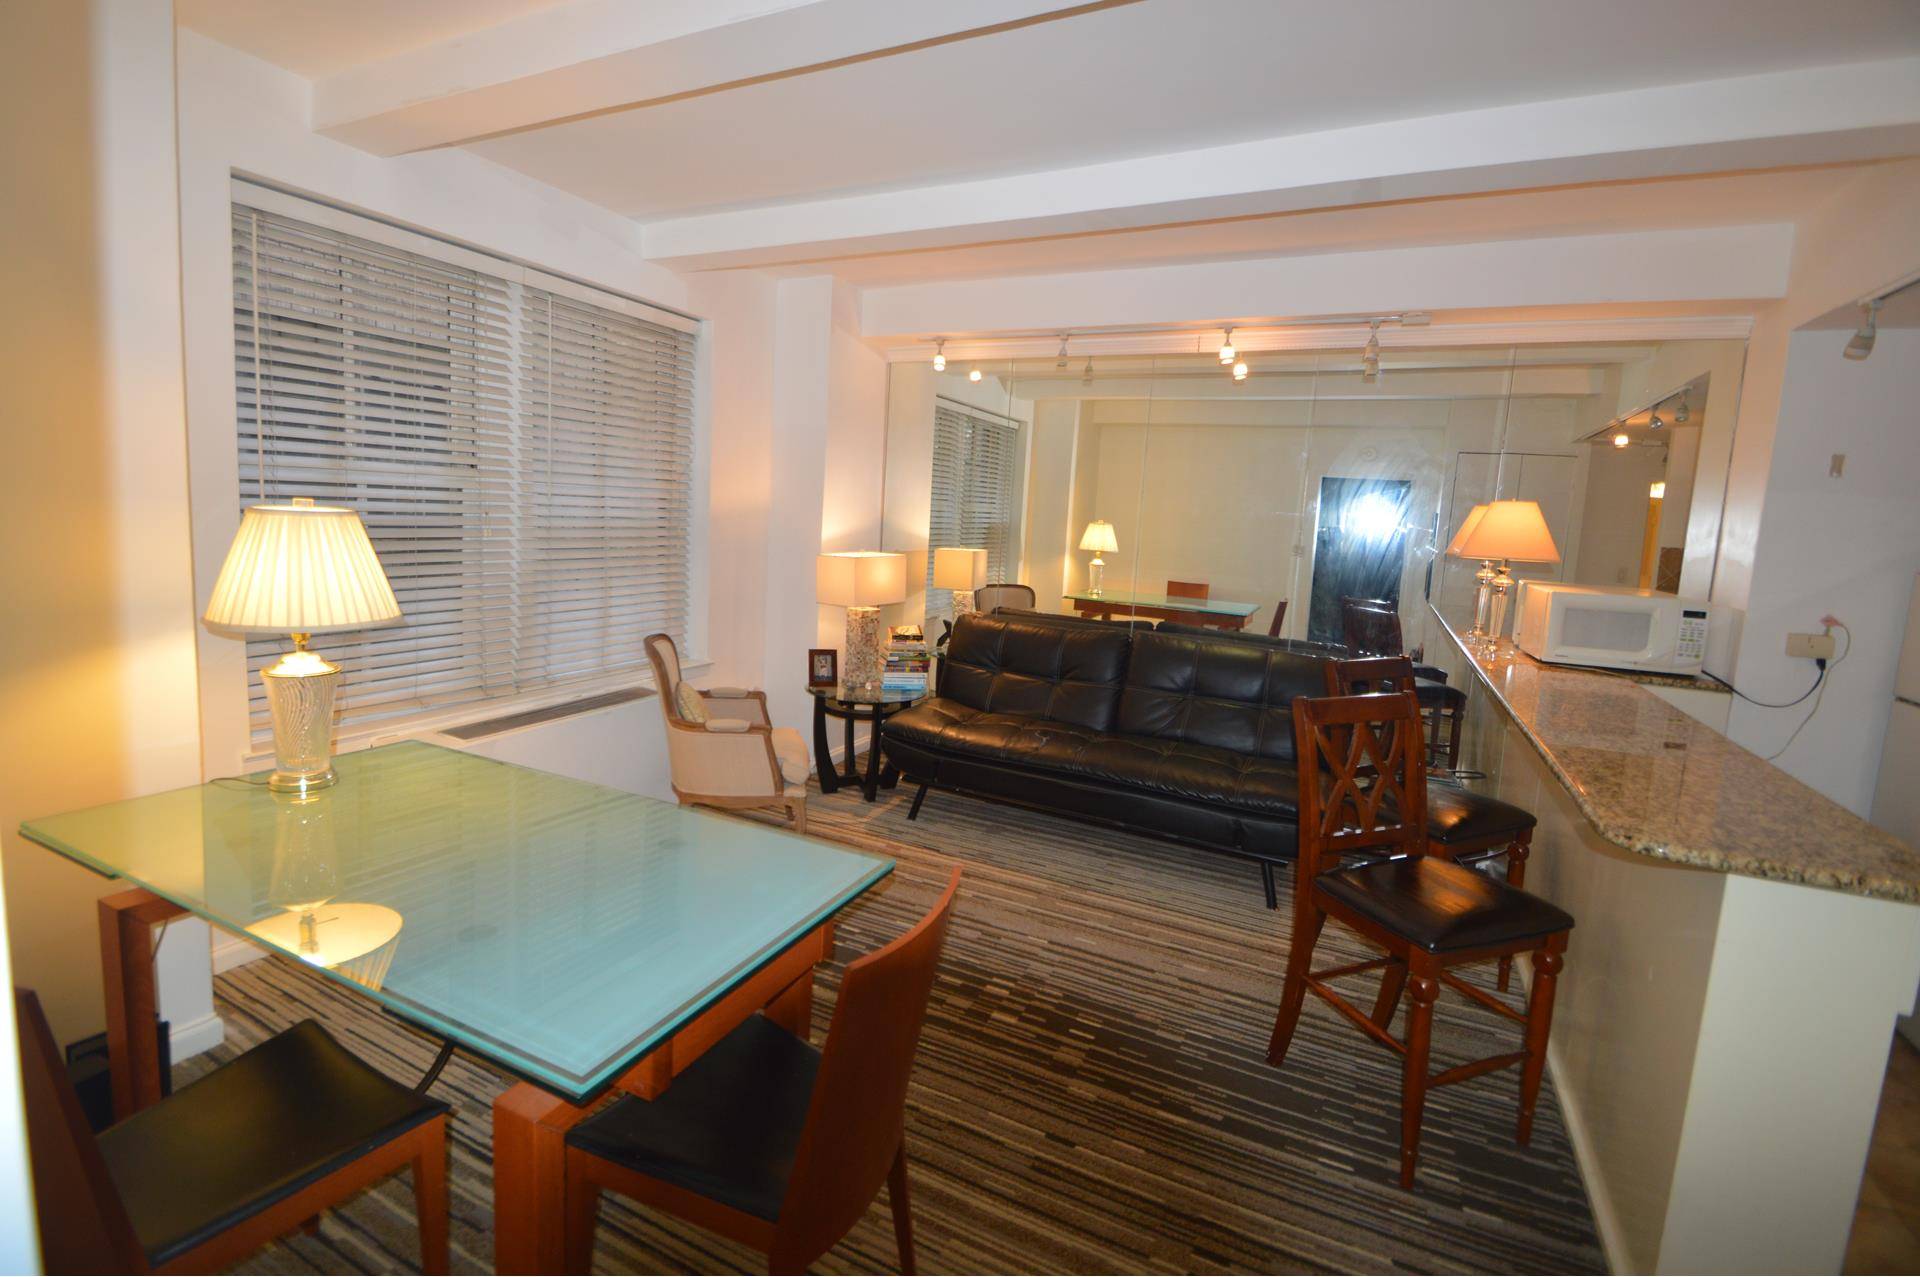 This spacious and open layout one bedroom apartment is located in the convenient central Midtown West neighborhood.